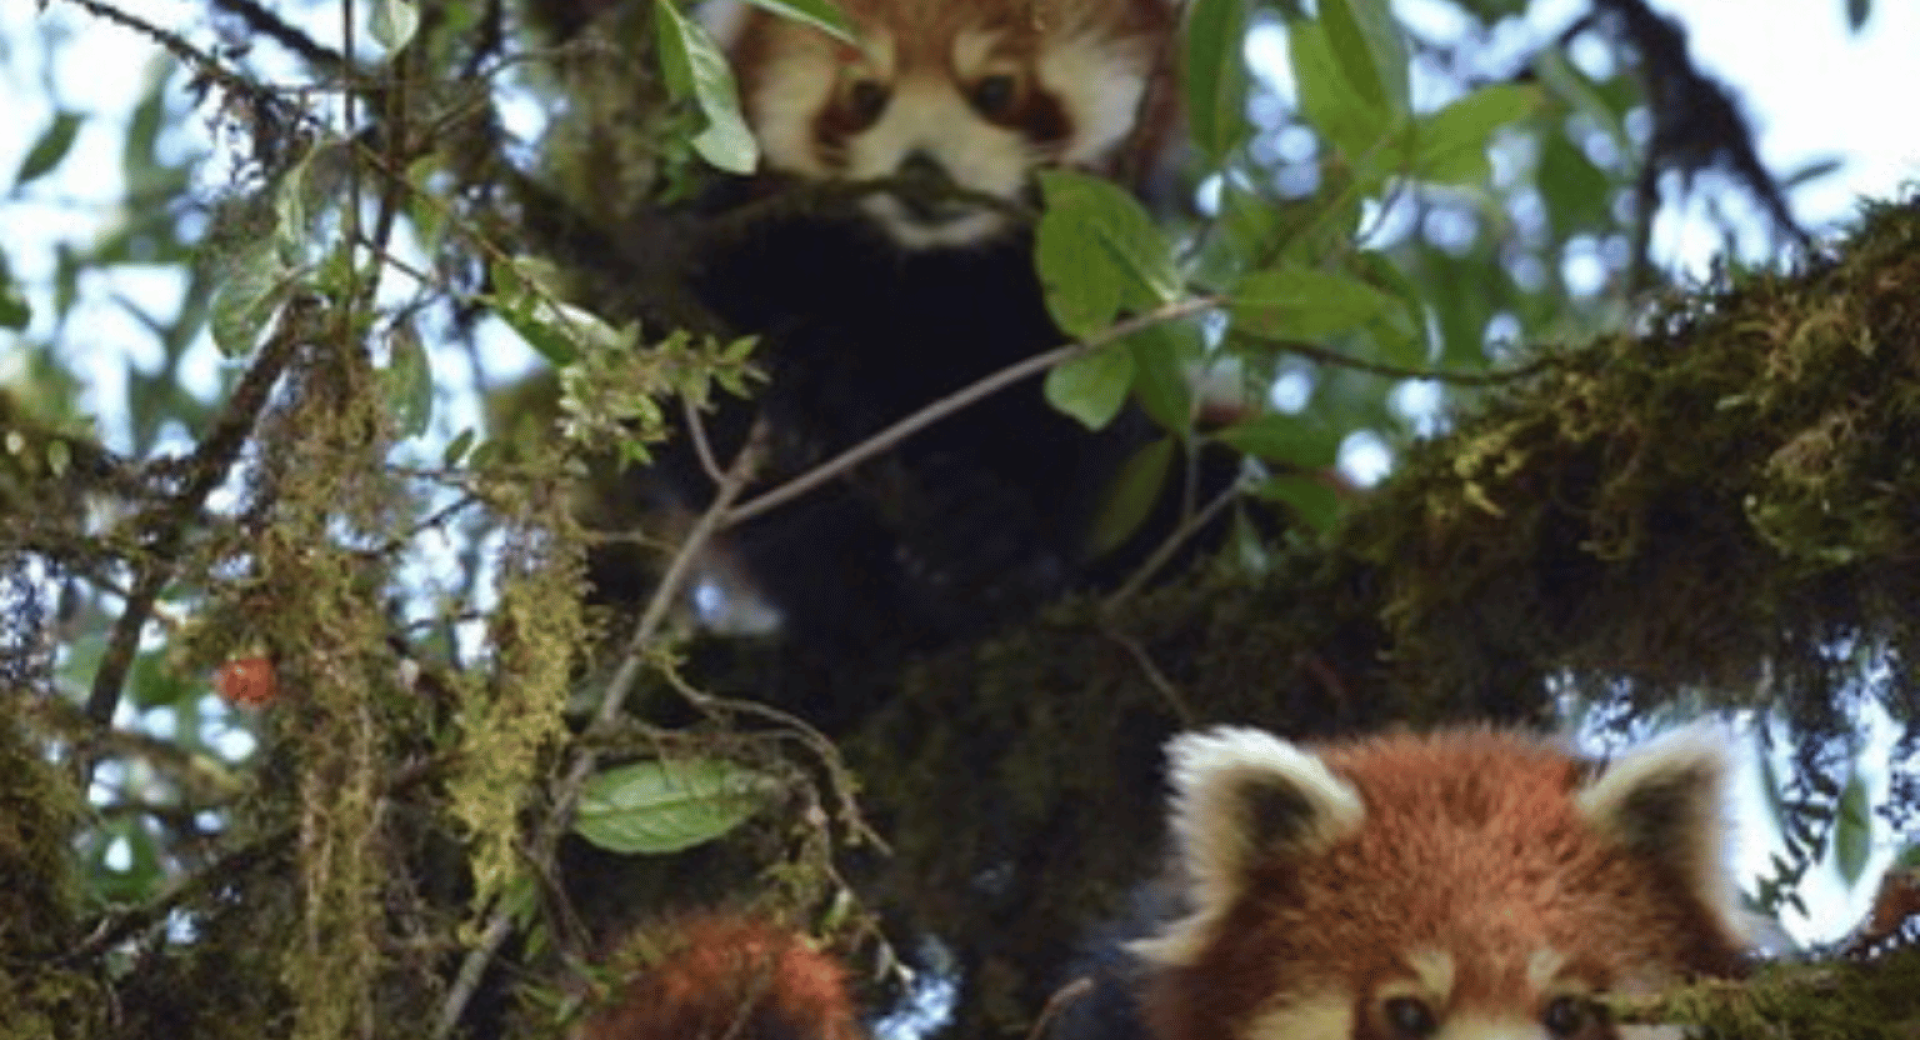 4 Ways To Save the First Panda for International Red Panda Day 2023